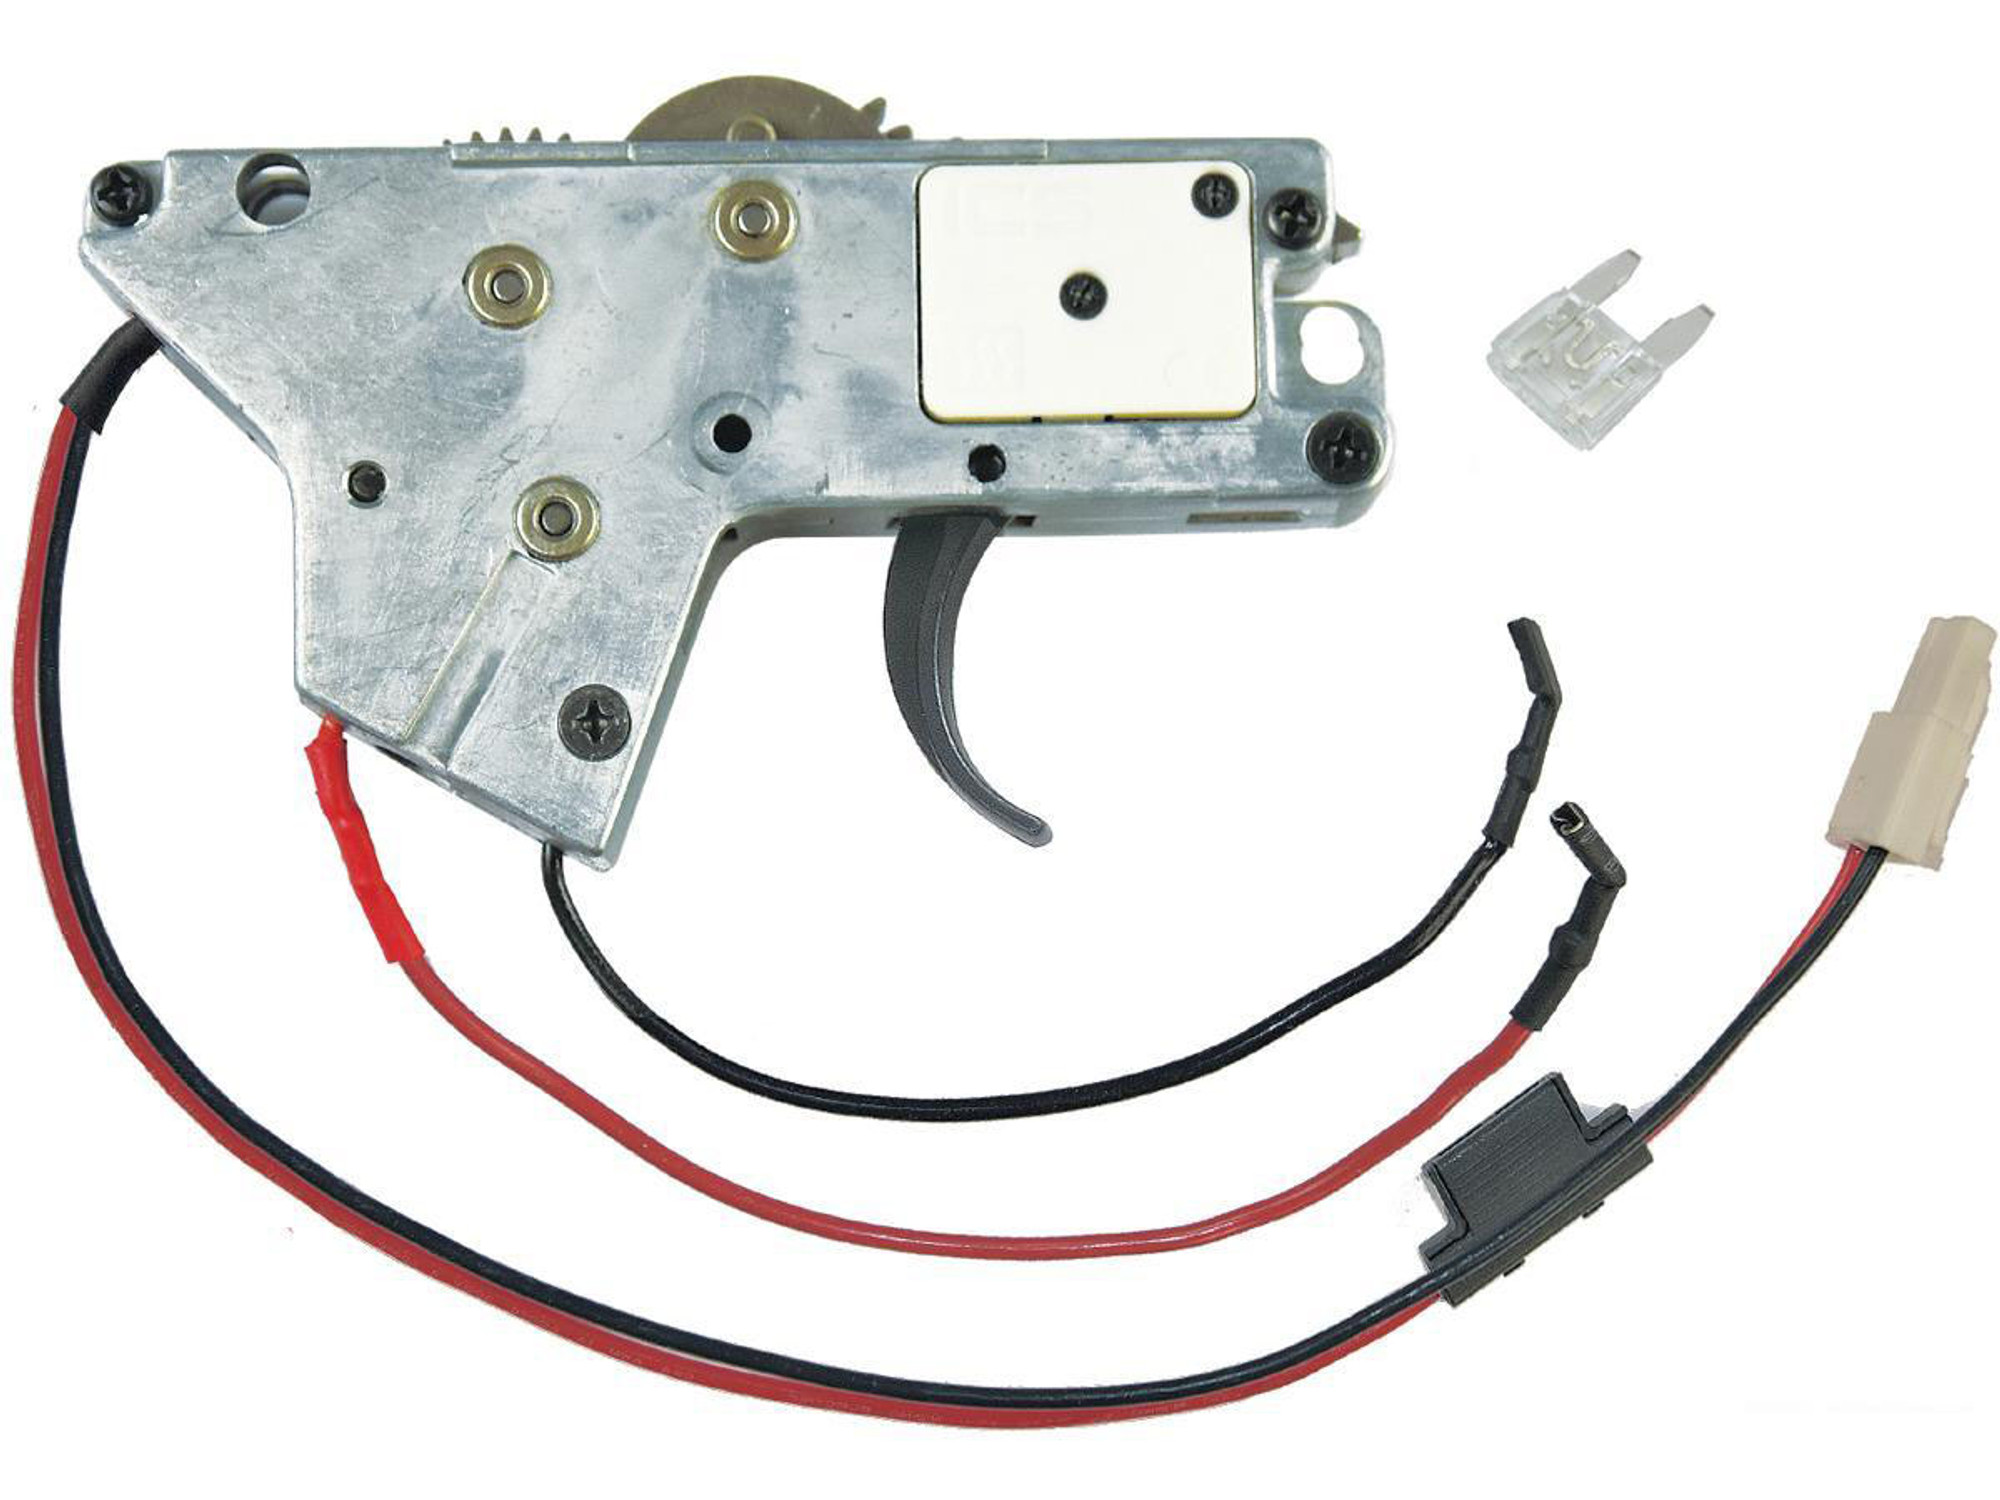 ICS Complete Gearbox Lower SSS for ICS Electric Blowback Airsoft AEGs